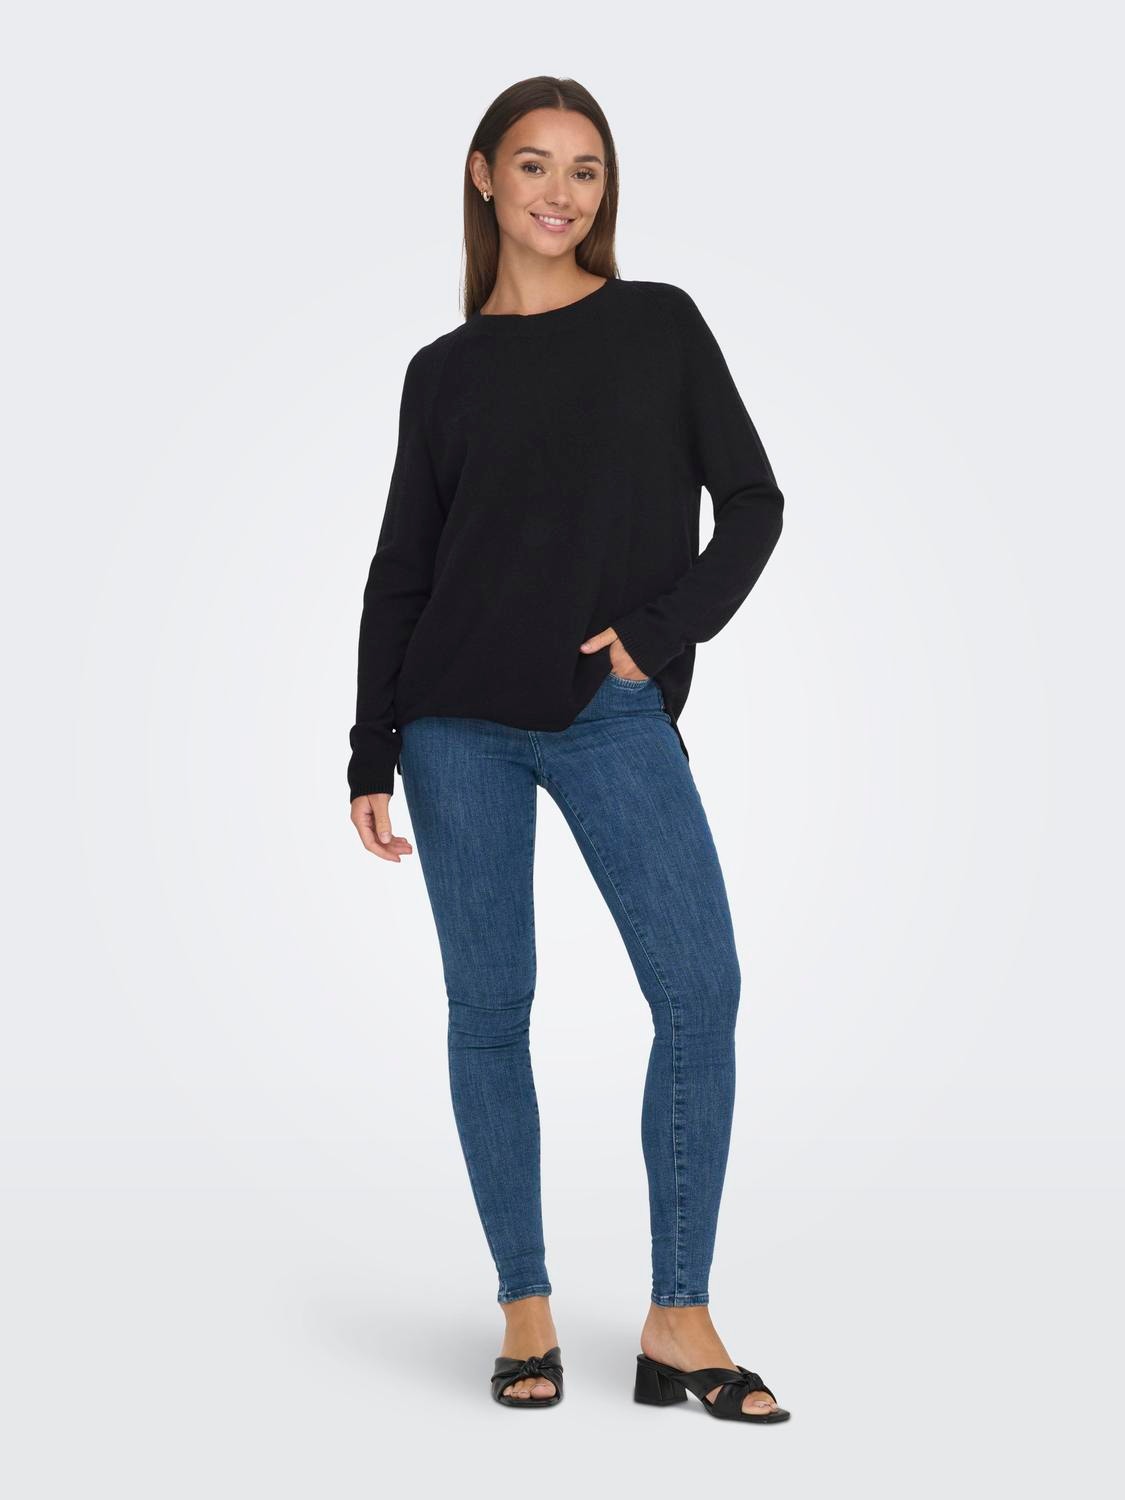 ONLY Pull-overs Knit Fit Col rond -Black - 15292897